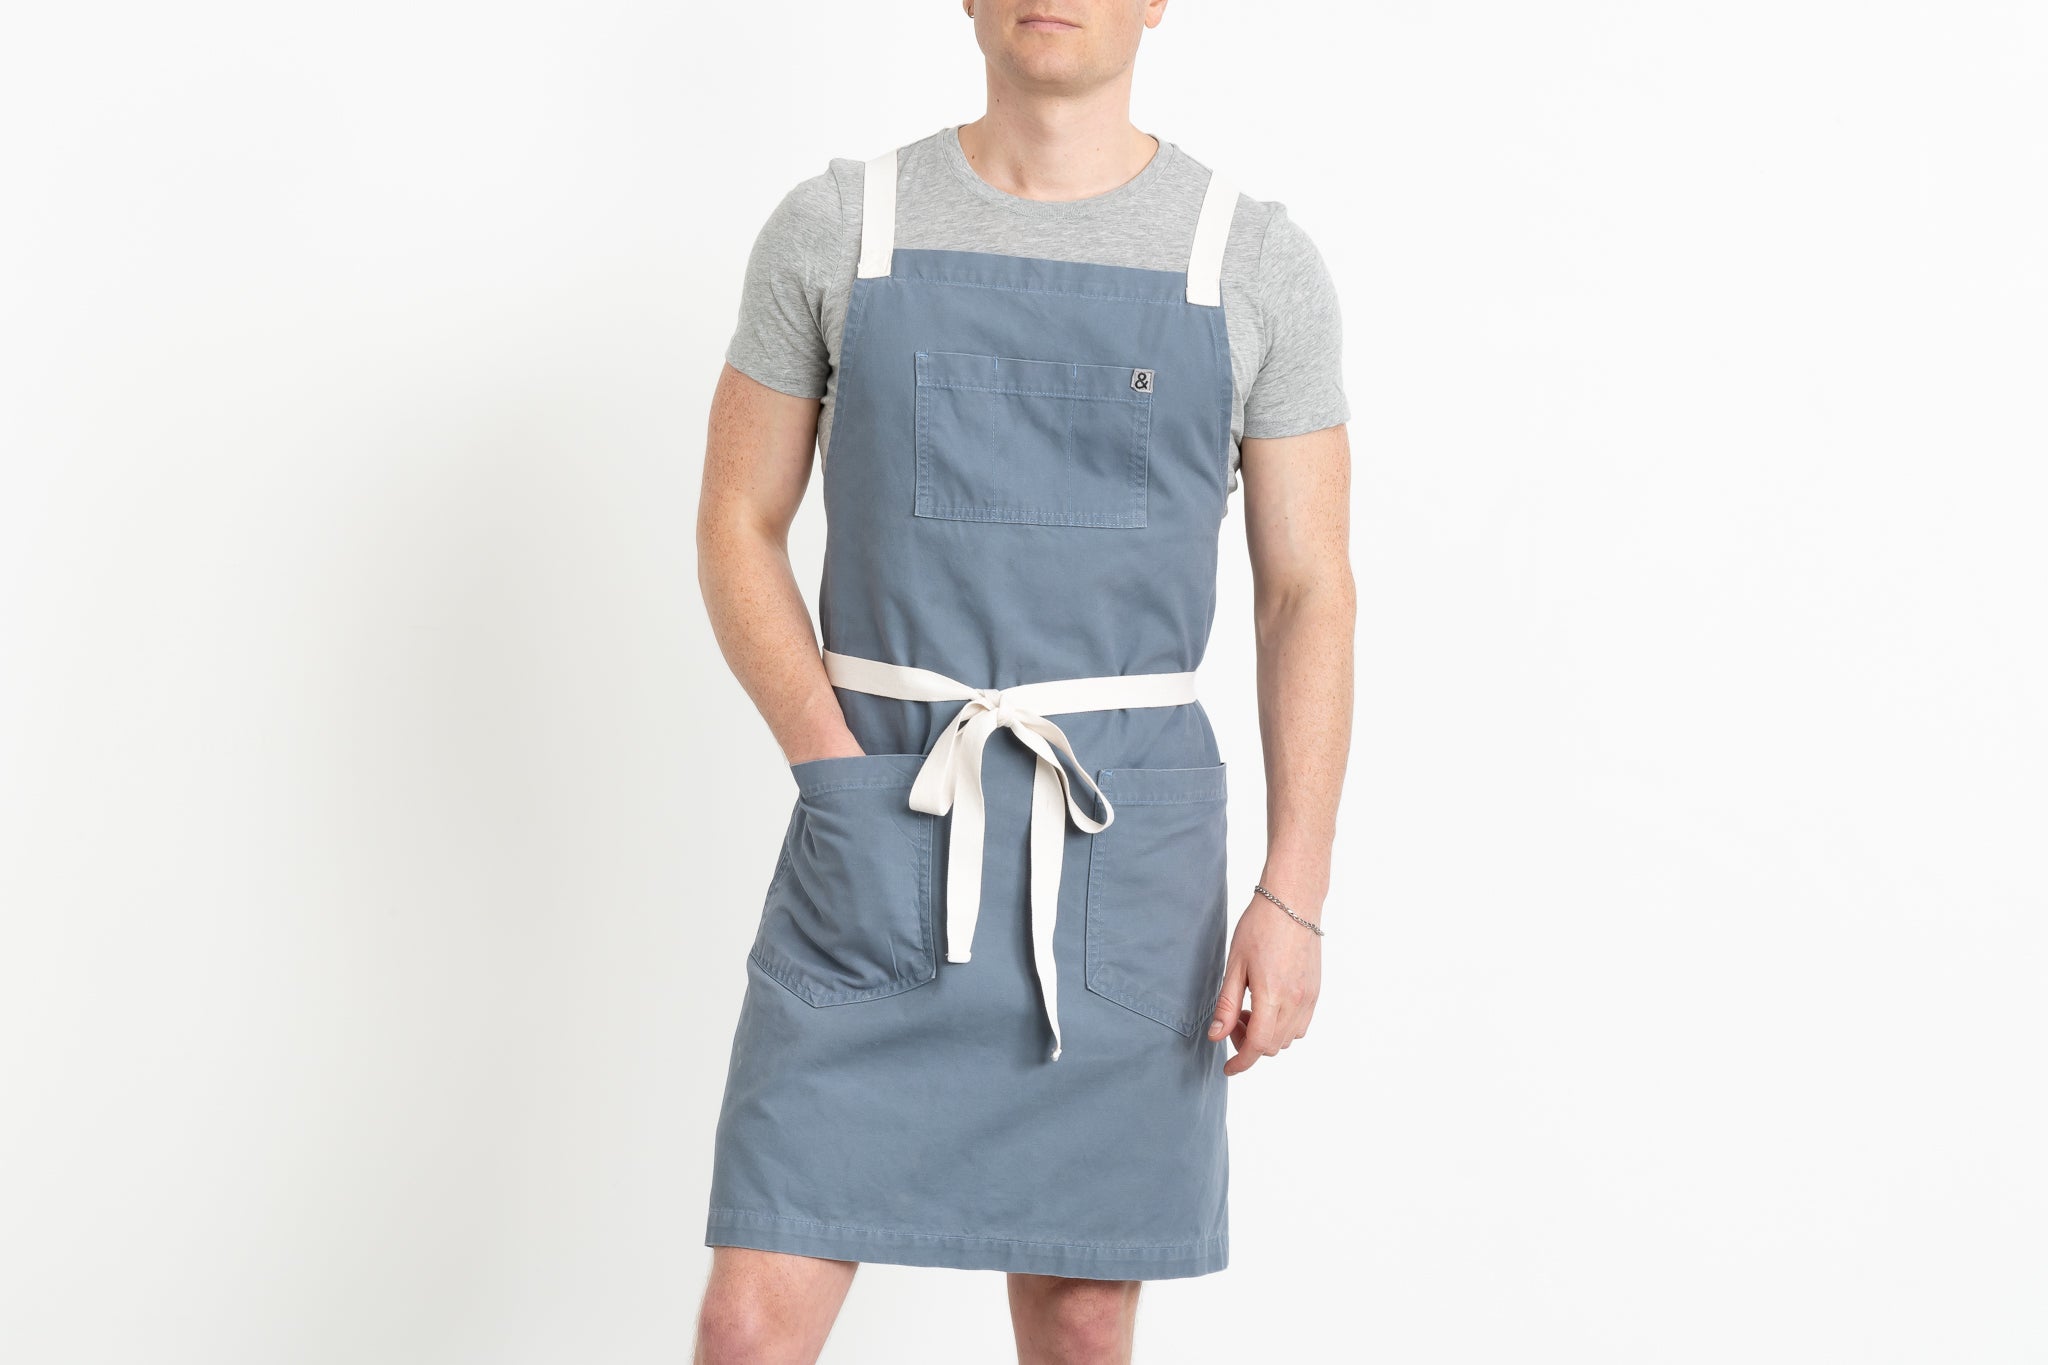 Apron with Pockets: A Comprehensive Review